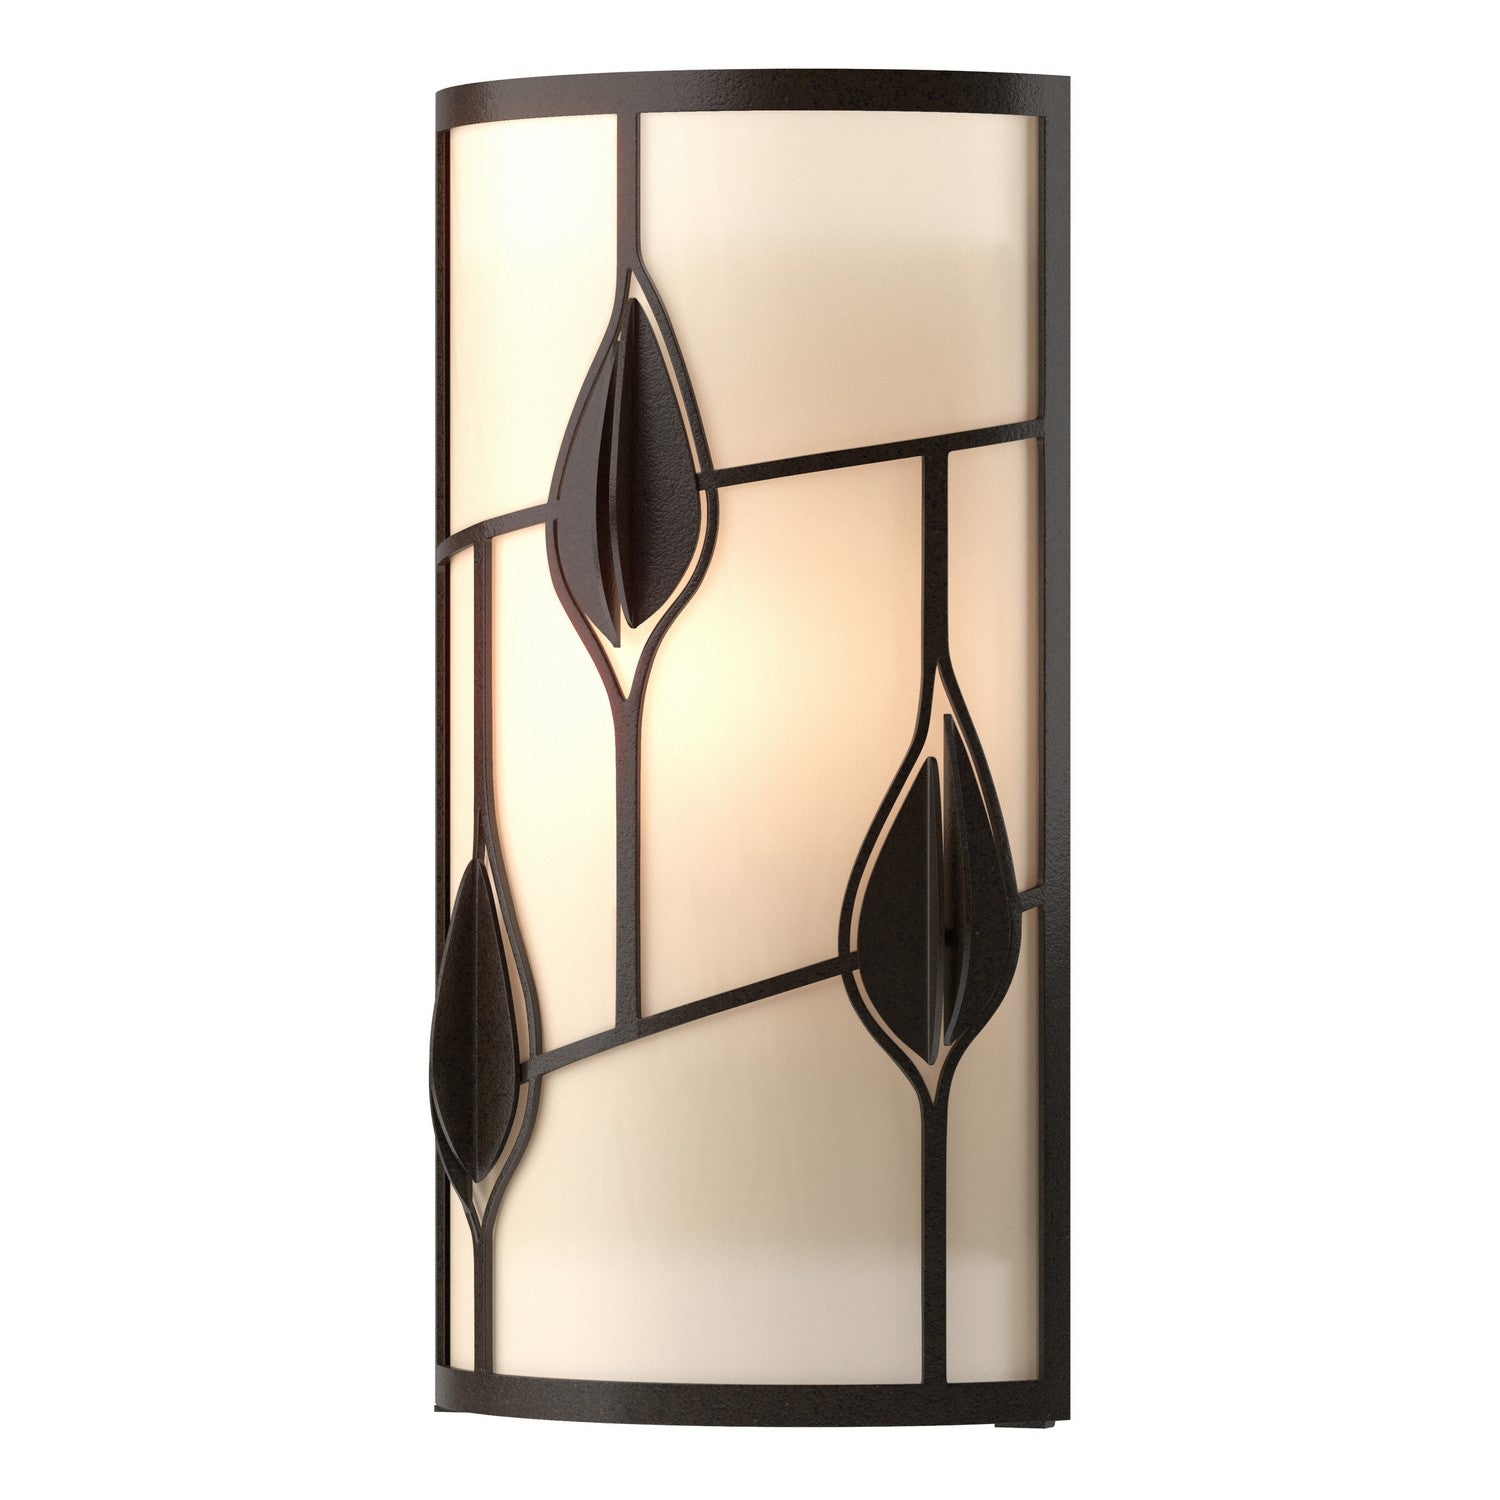 Hubbardton Forge - 205420-SKT-14-BB0420 - One Light Wall Sconce - Alison's Leaves - Oil Rubbed Bronze